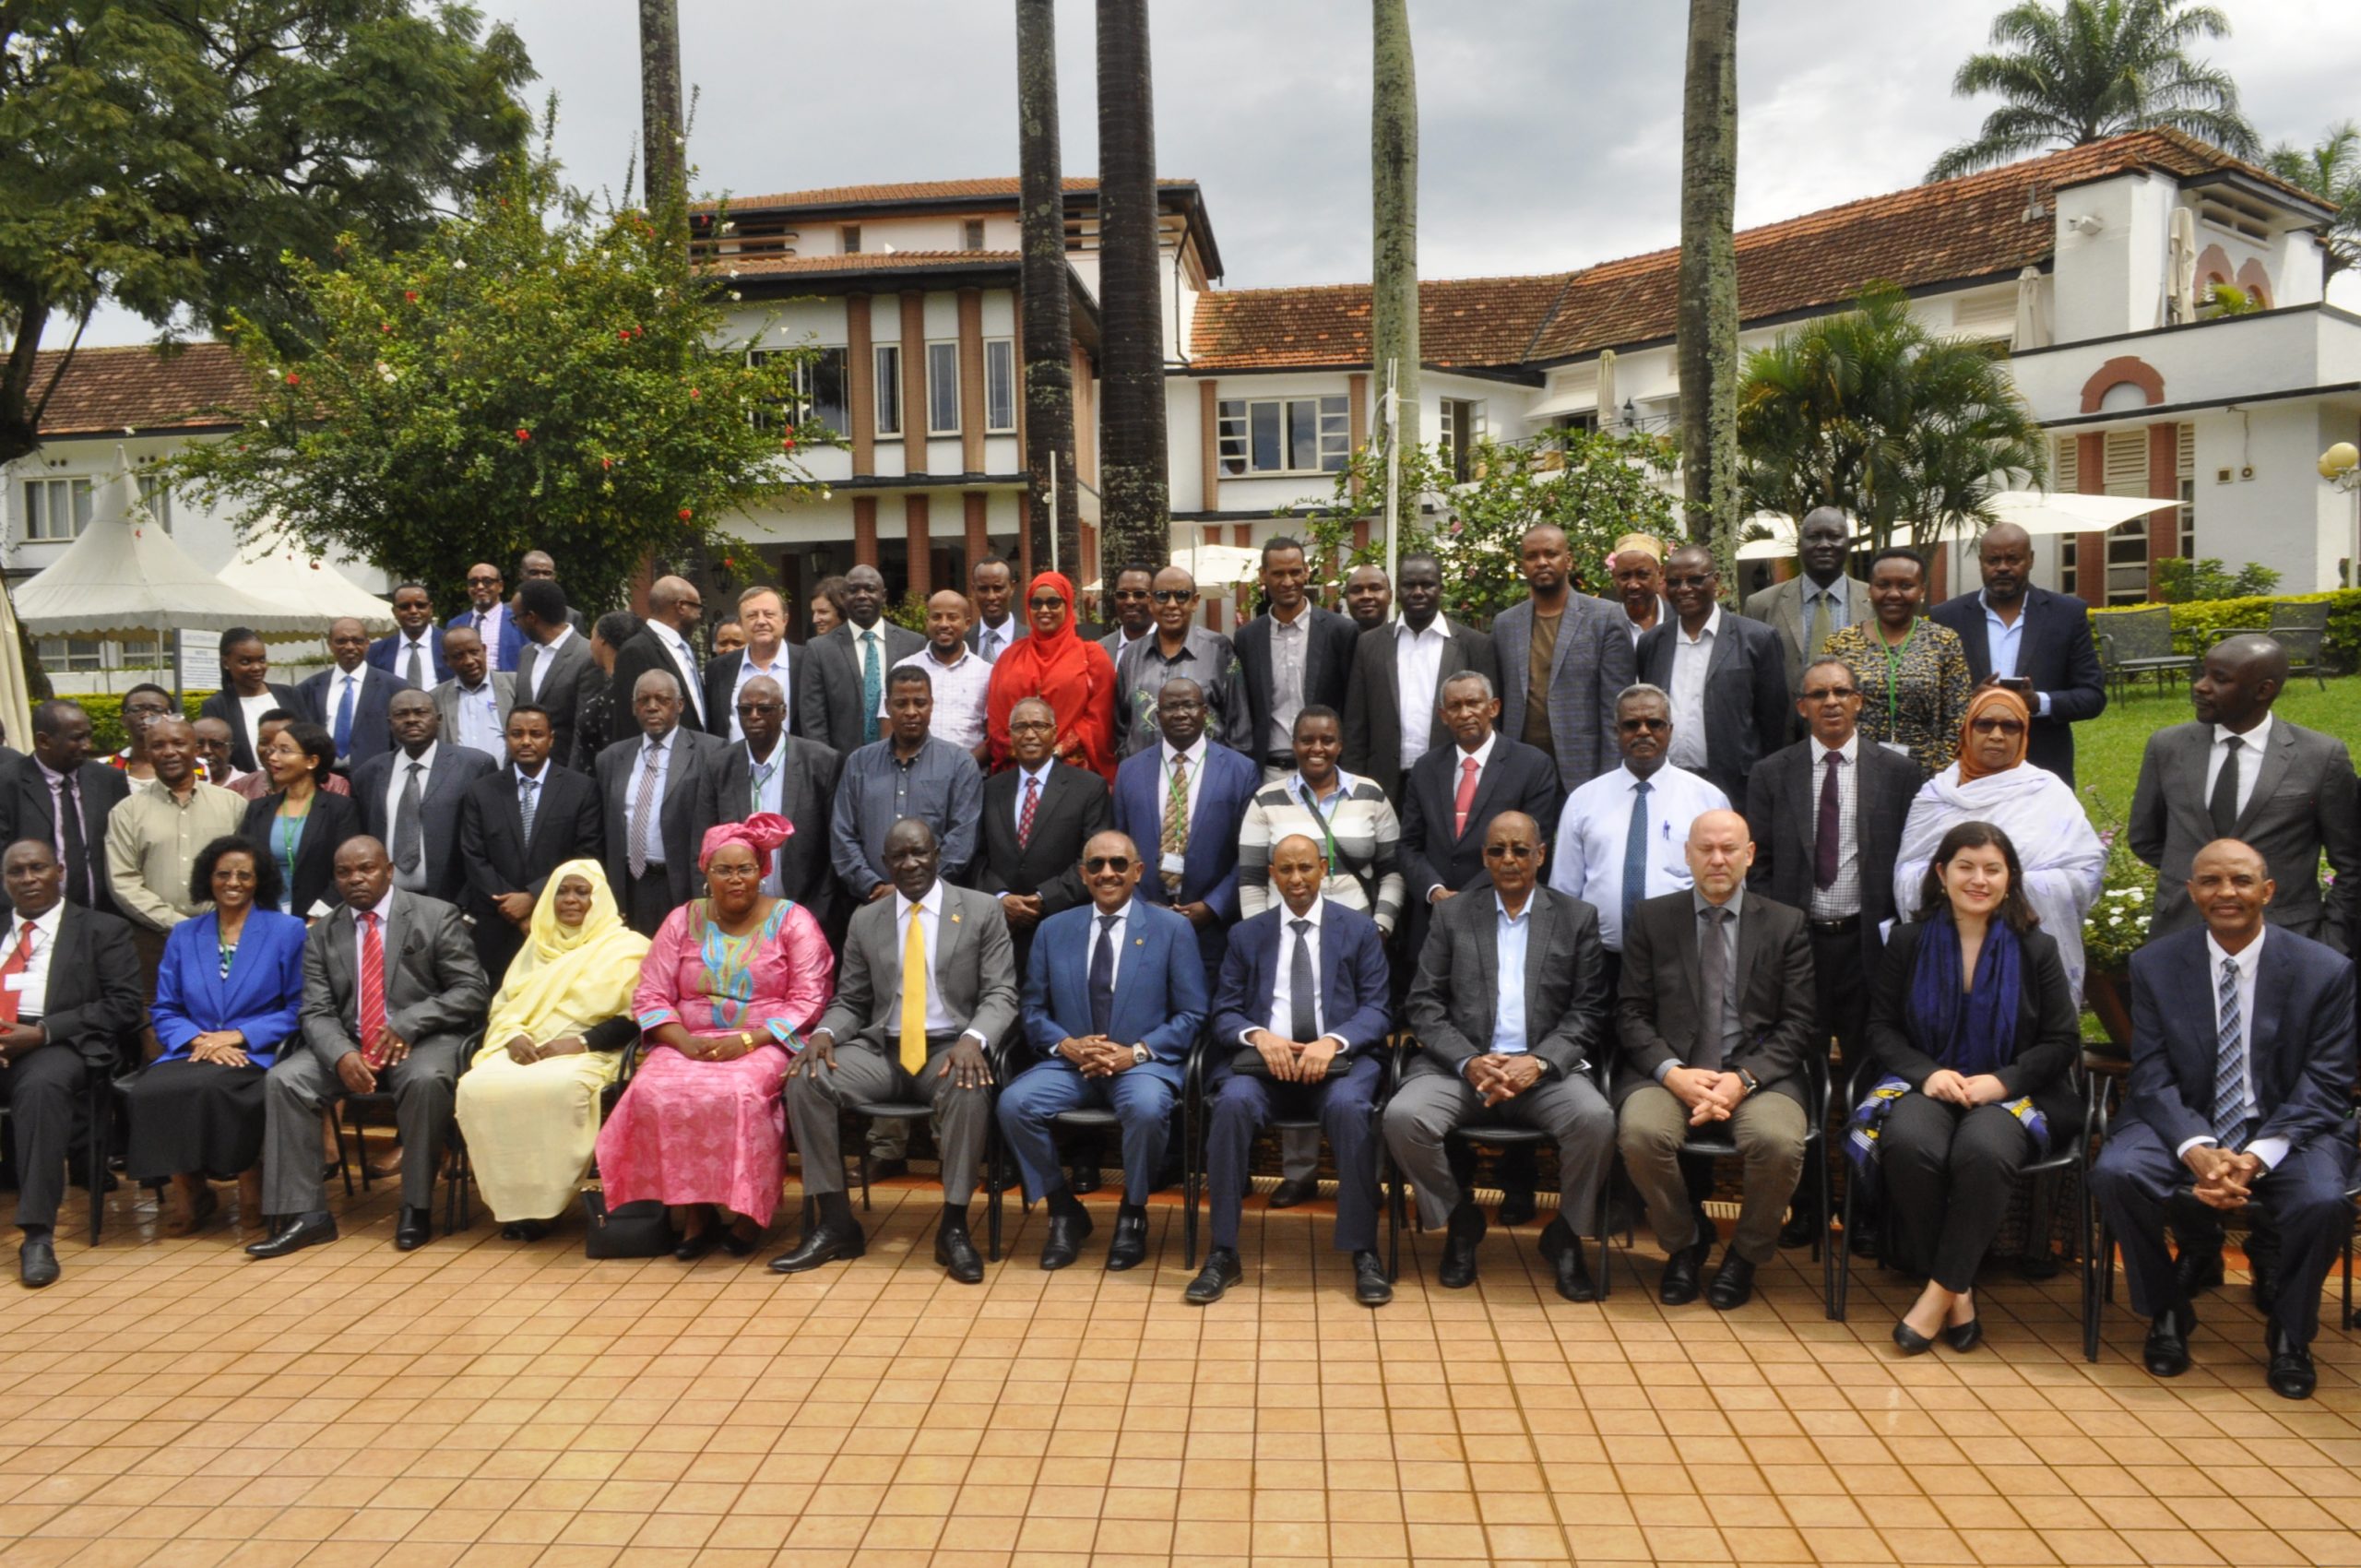 COMMUNIQUÉ OF THE FIFTH GENERAL ASSEMBLY MEETING OF THE IGAD DROUGHT DISASTER RESILIENCE AND SUSTAINABILITY INITIATIVE (IDDRSI)